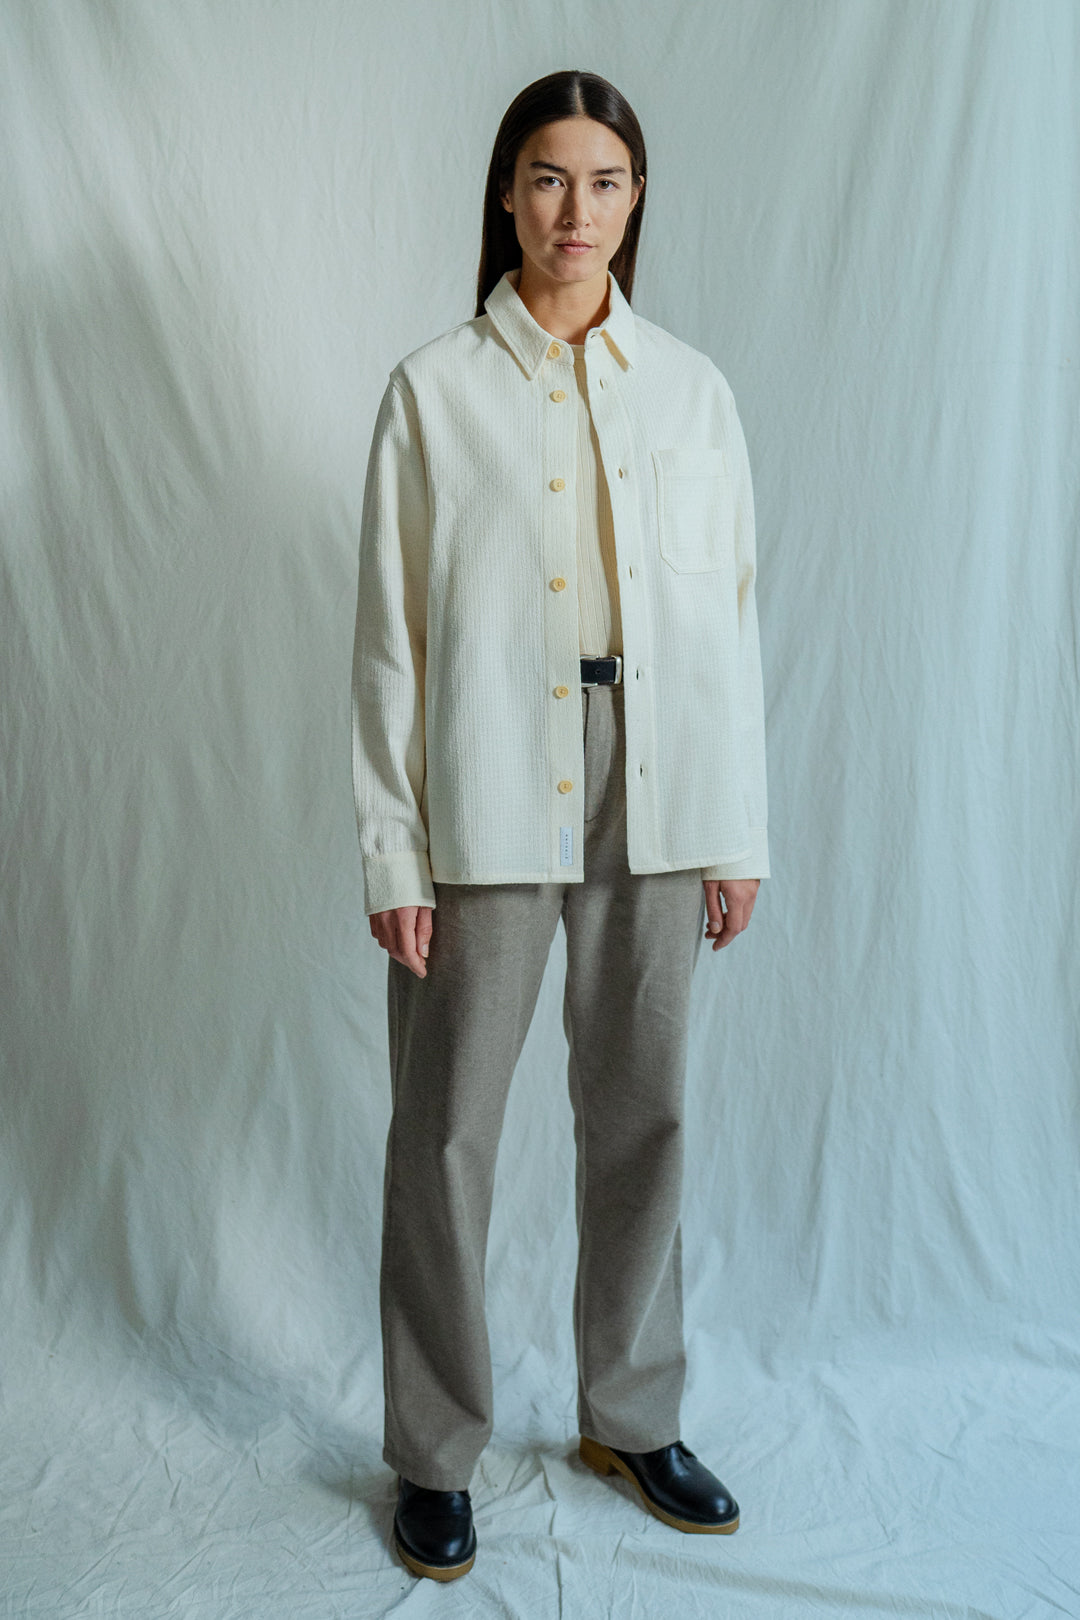 Cream white shirt made from 100% organic cotton from Rotholz